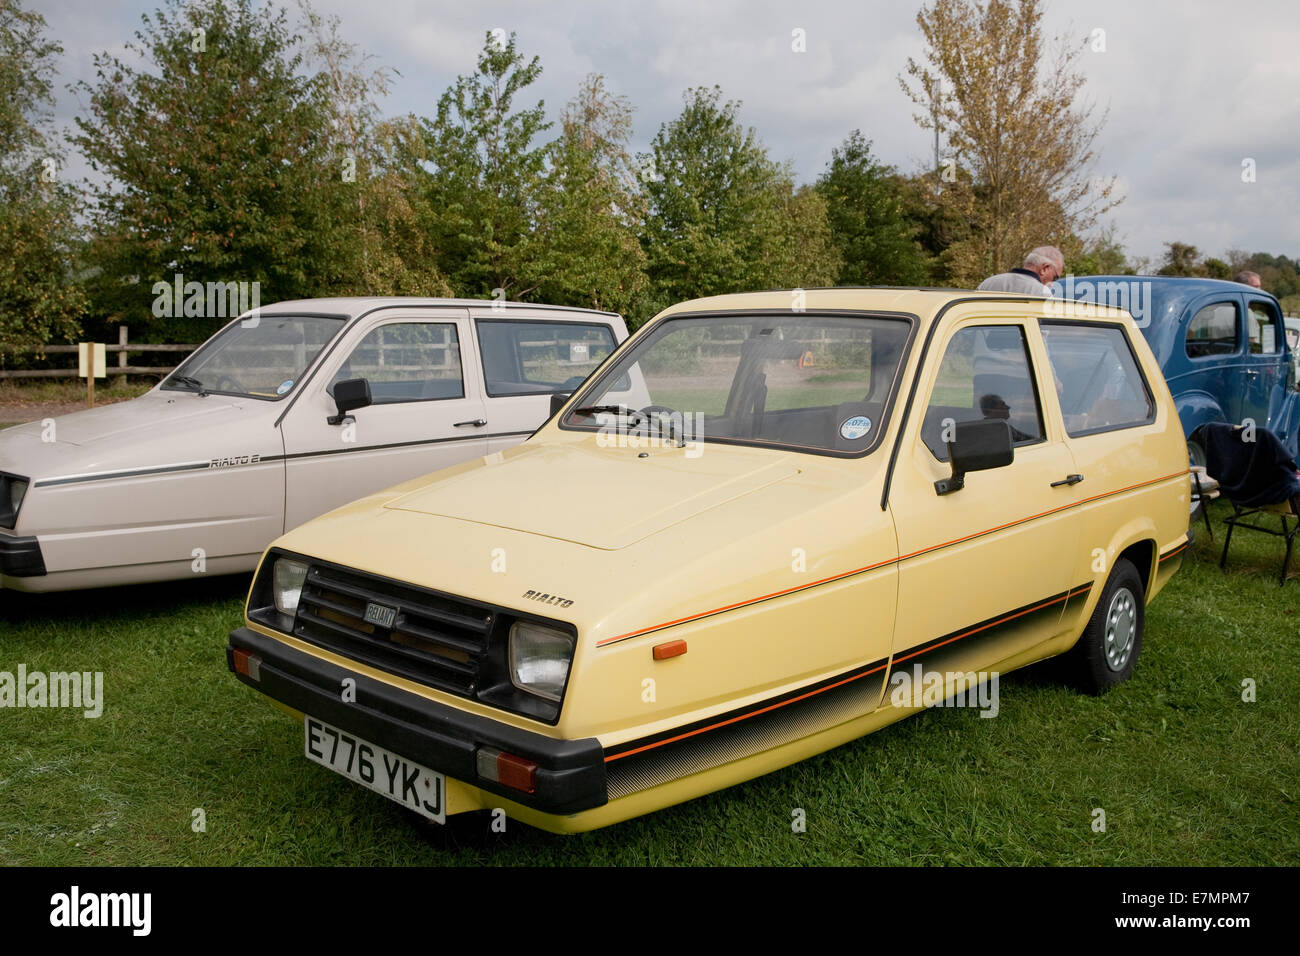 Reliant Rialto estate SE 848CC 1988 at the St Christopher's Hospice Classic Car Show which took place in Orpington, Kent Stock Photo